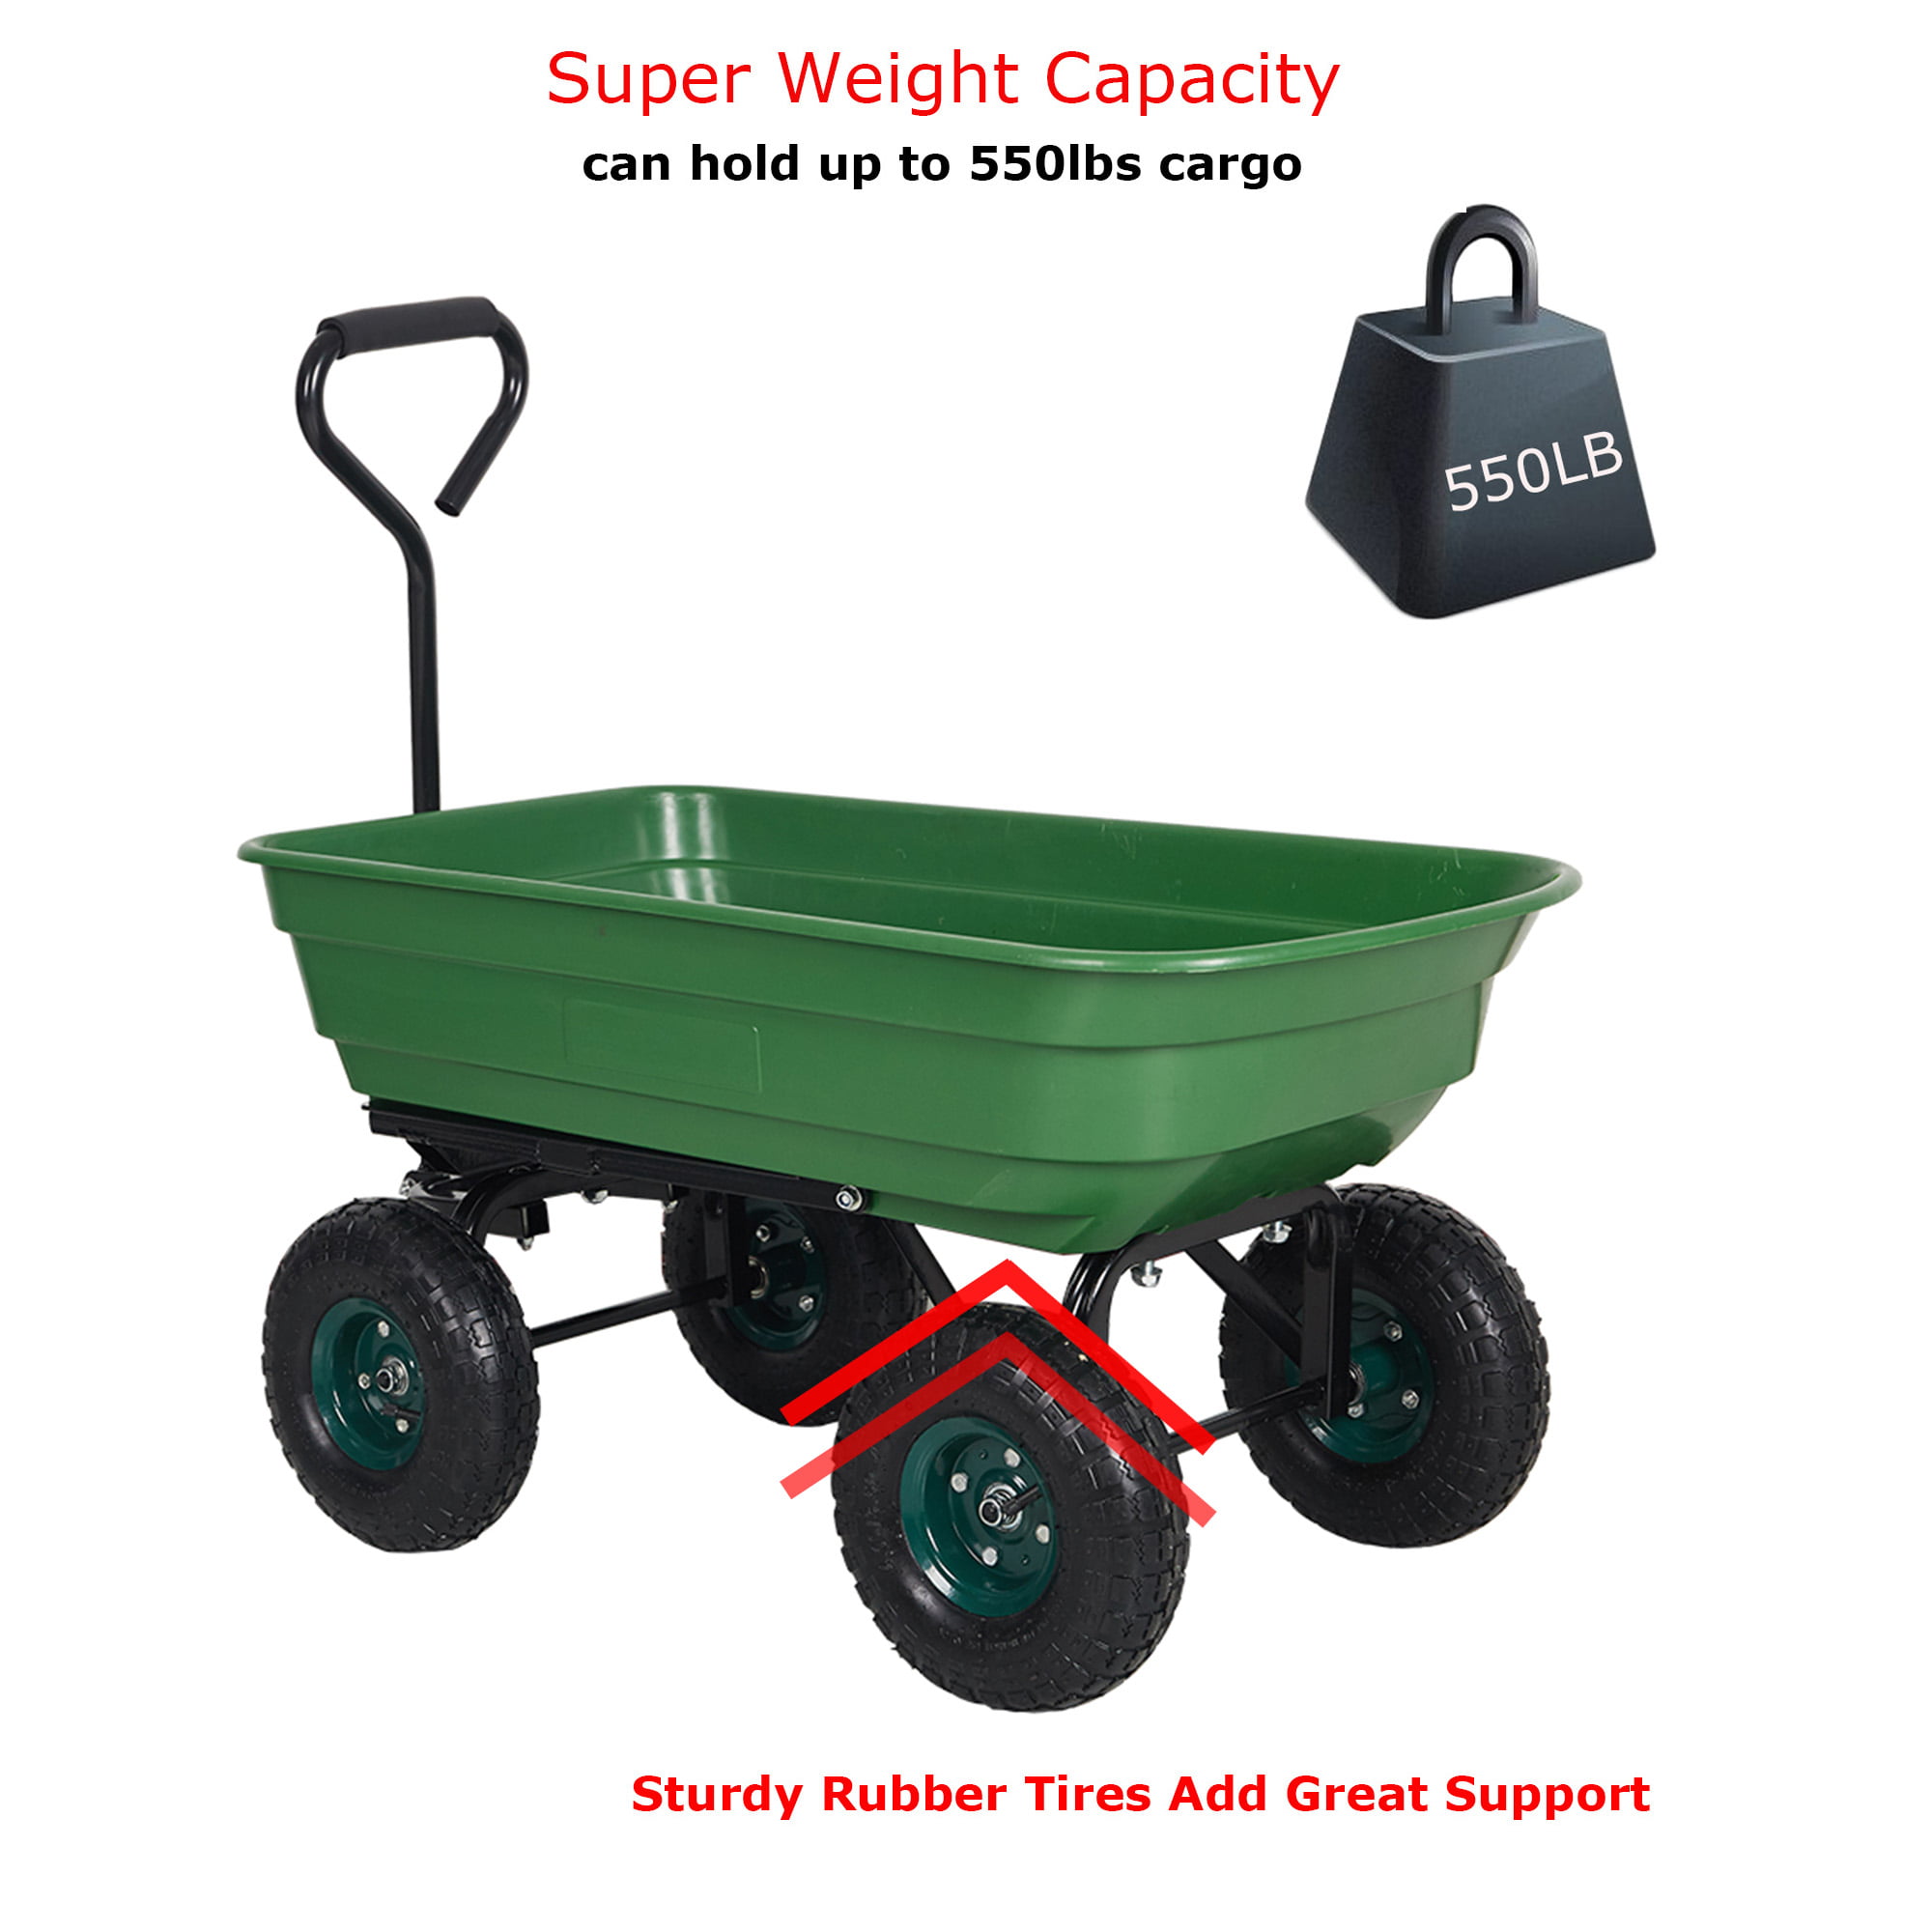 LUCKYERMORE Utility Wagon Cart Steel Garden Cart 550 LBS Weight Capacity Four Side Removable Multifunctional Strong Wagon Lawn Cart Heavy Duty Smooth Wheel for Goods Transporting 